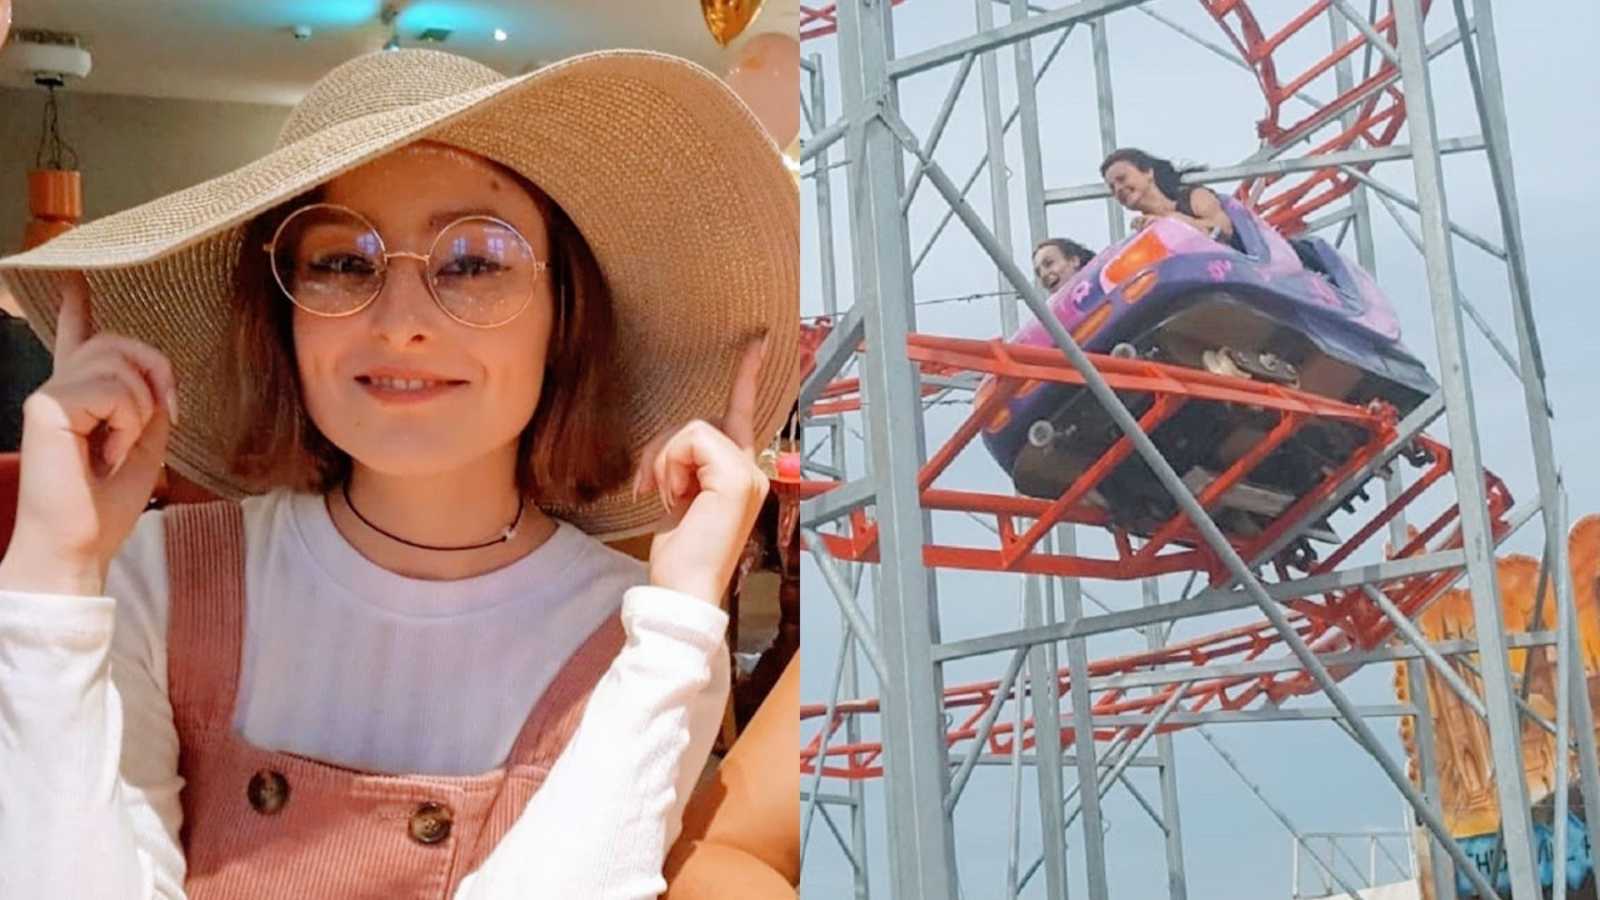 A woman sits at a table wearing overalls and a big sunhat and a woman and her mother ride a rollercoaster together